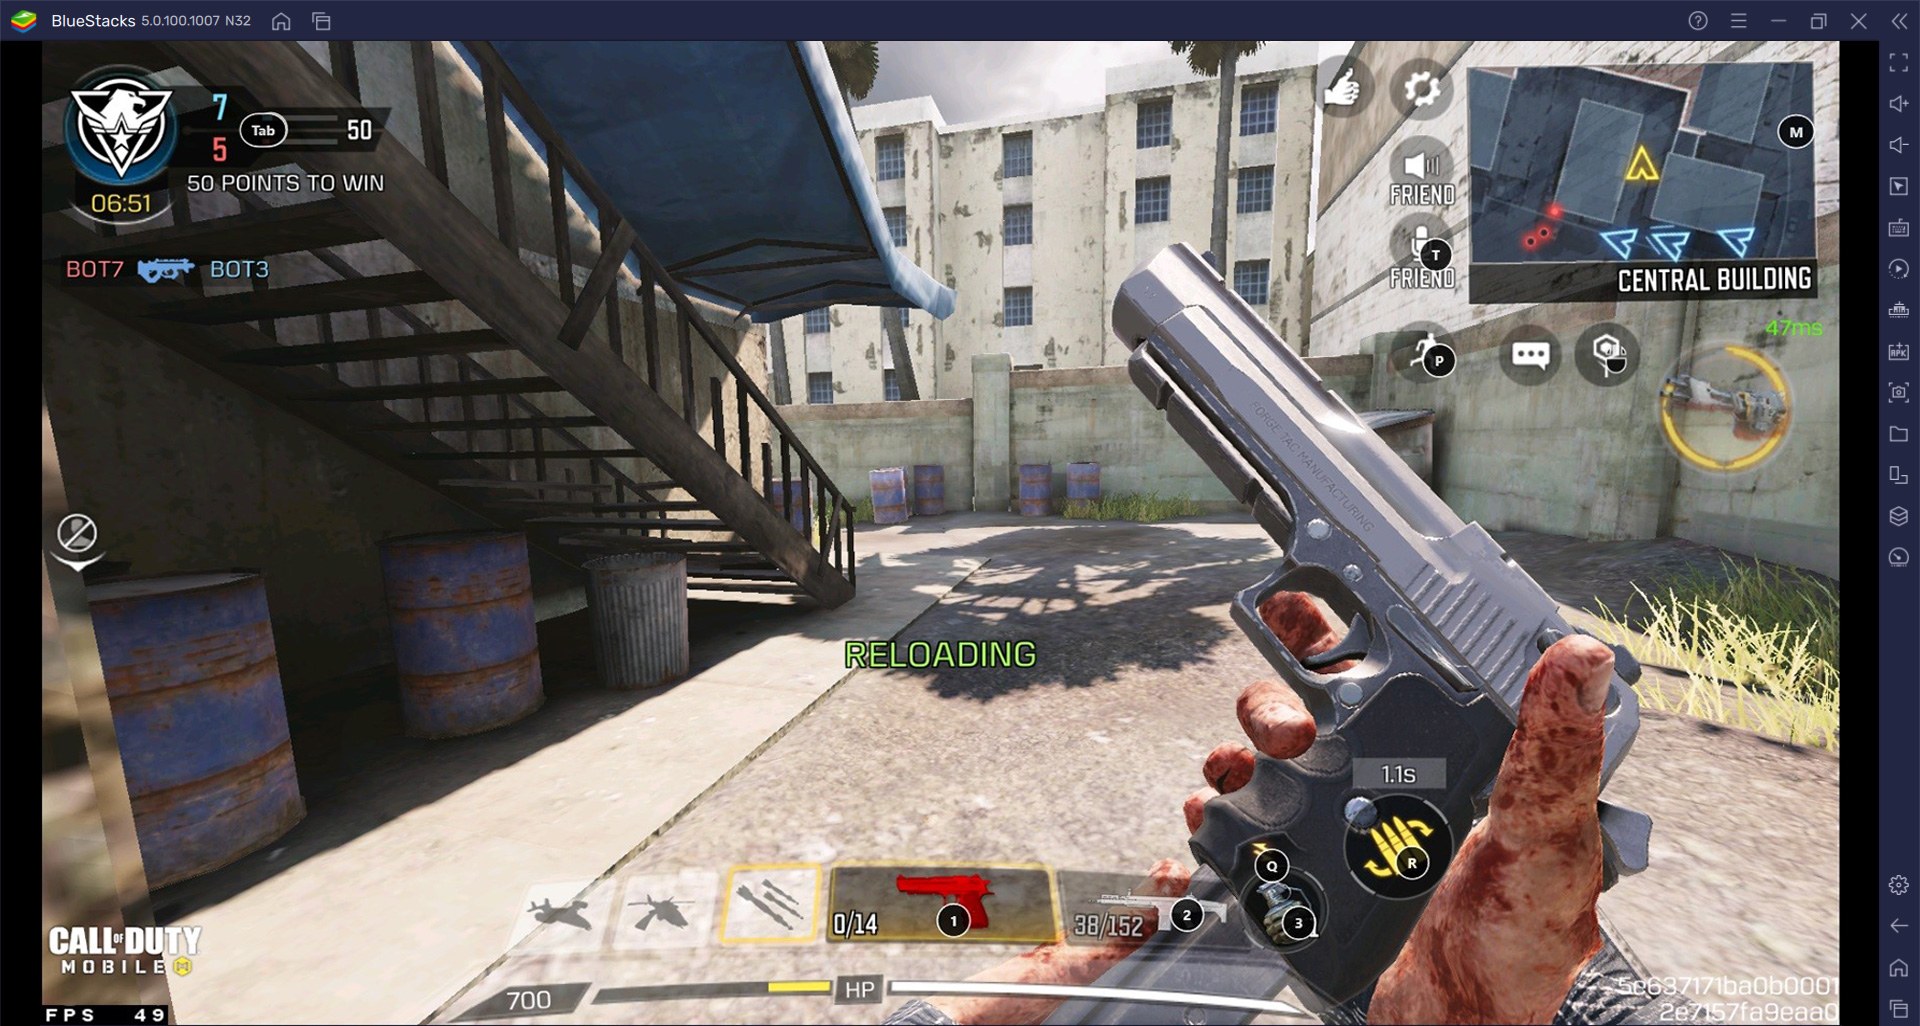 Call of Duty: Mobile Weapon Guide - The .50 GS is Your Secondary